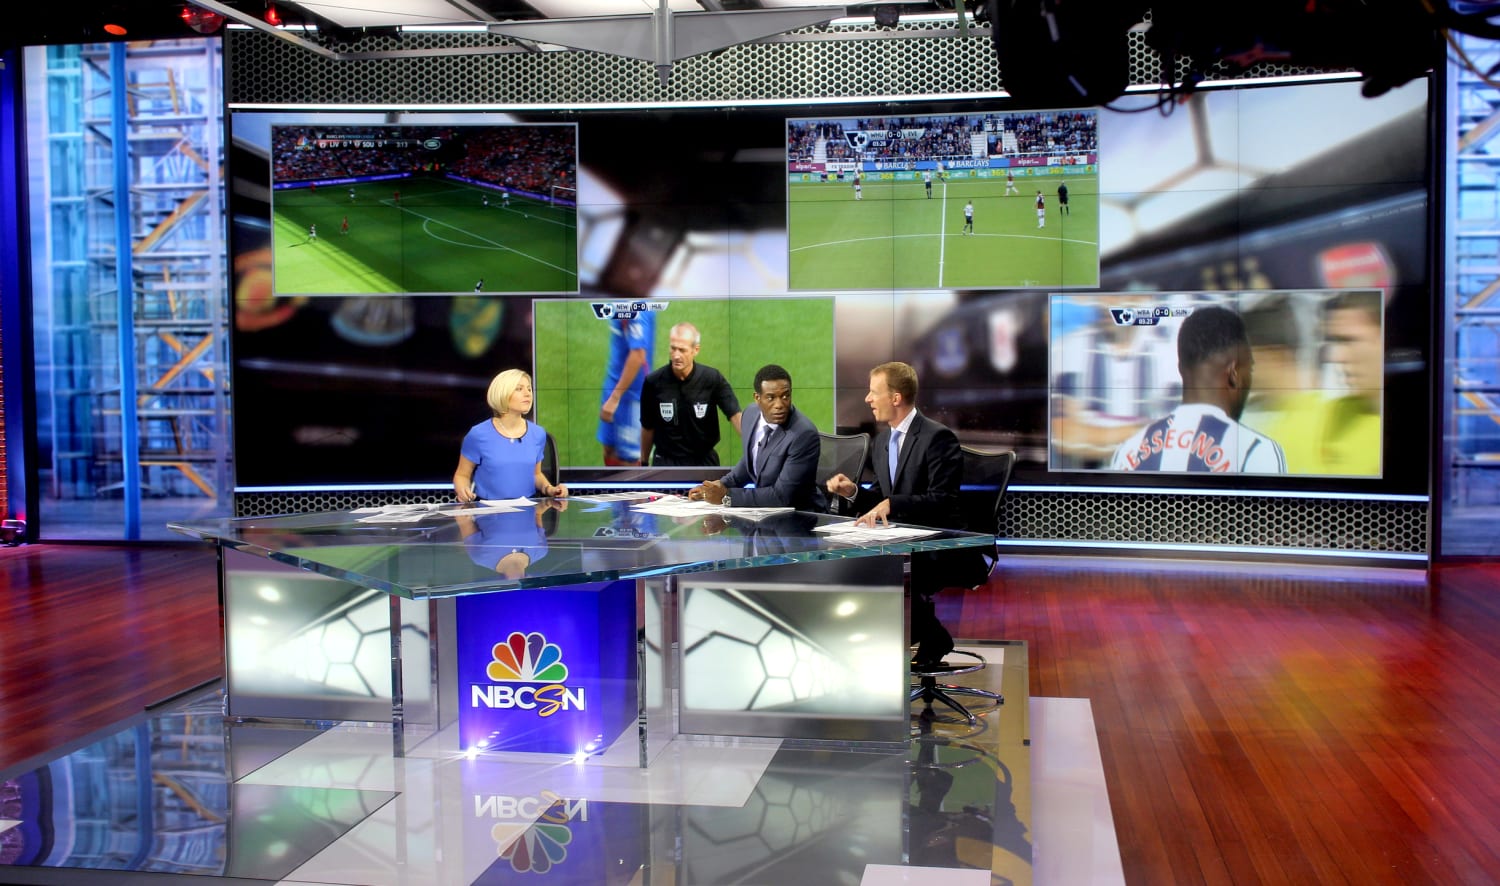 NBC to shut down sports cable channel NBCSN